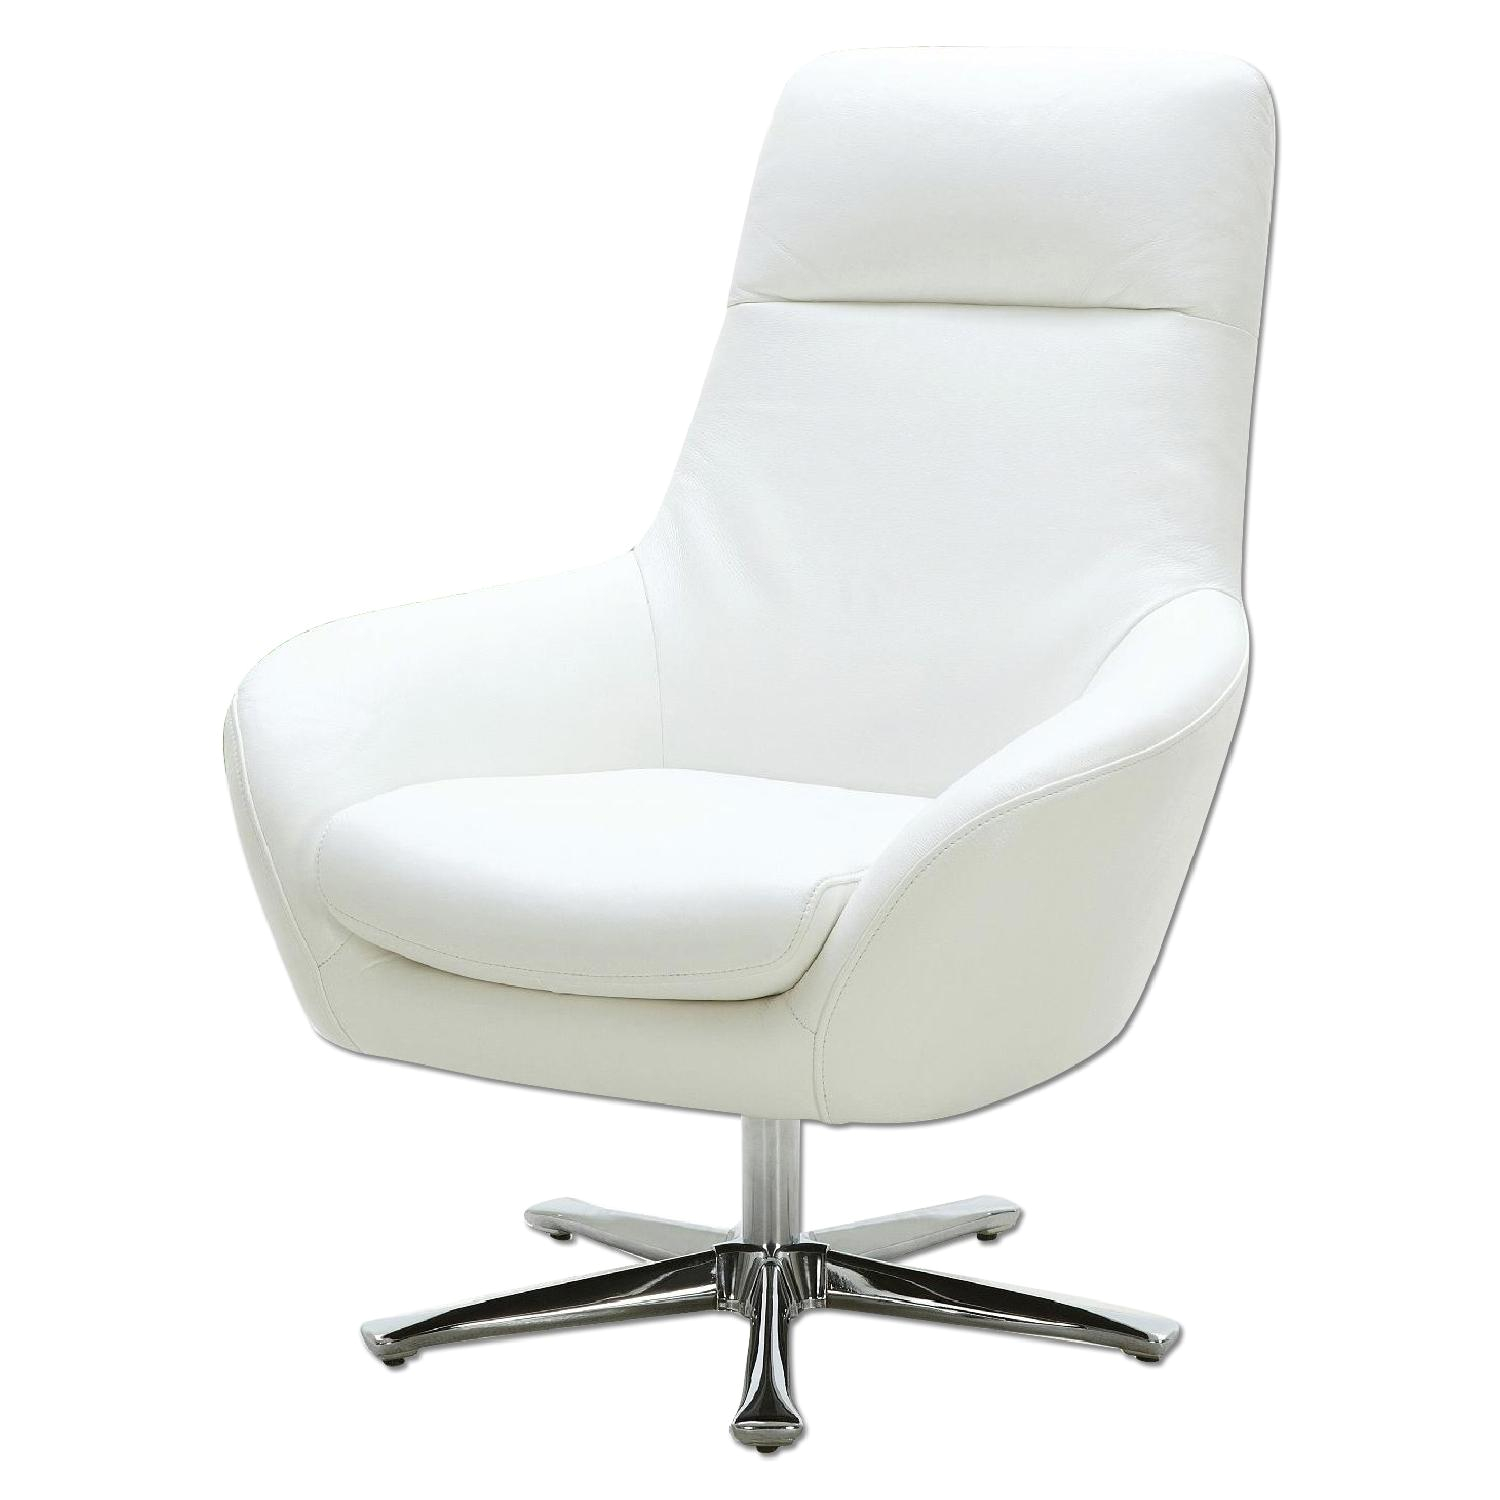 modern style swivel accent chair in white premium full leather w high back design star shaped chrome base